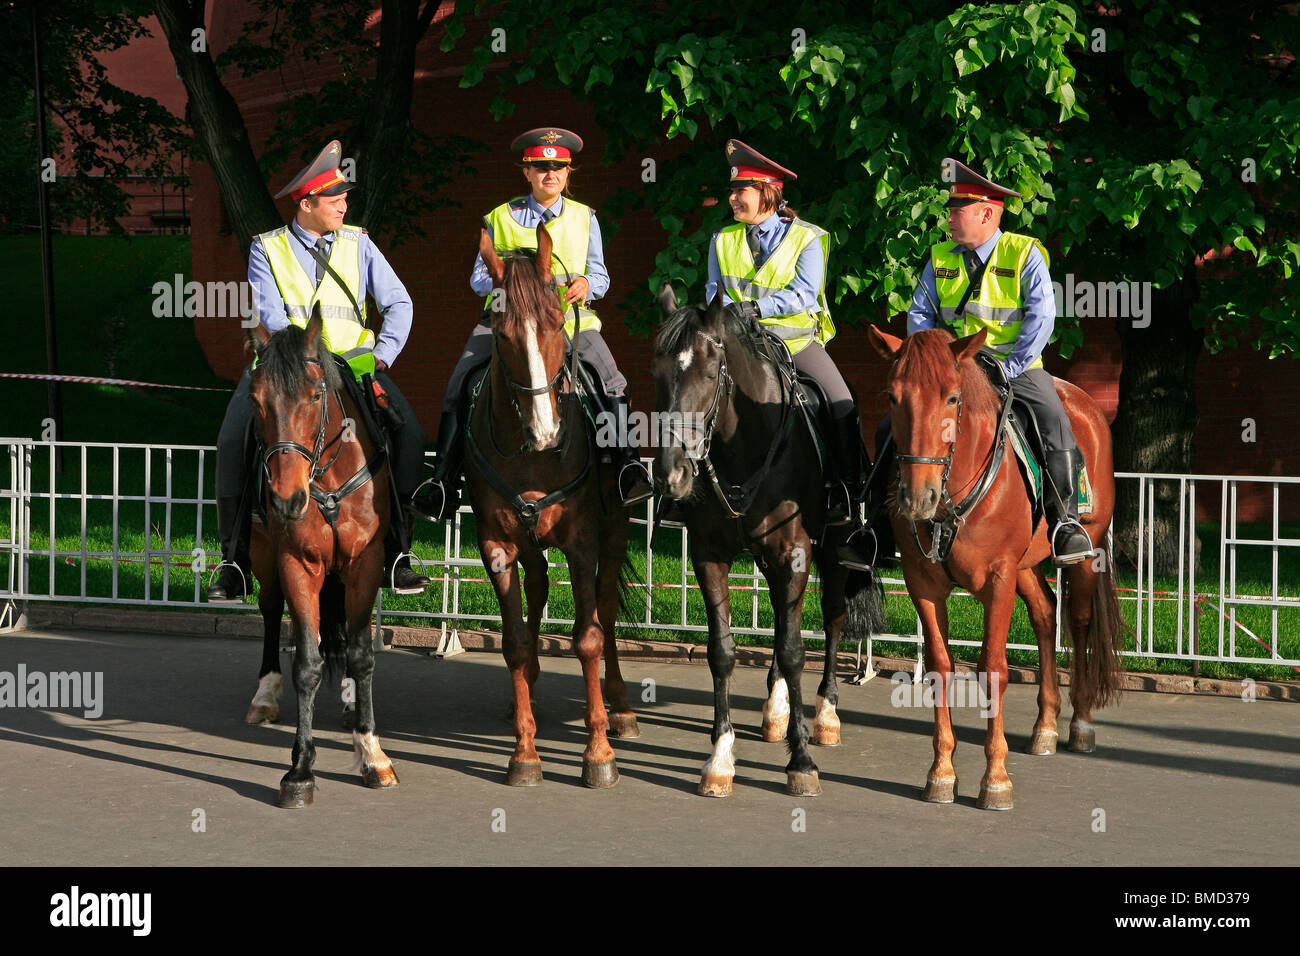 Four mounted Russian police officers outside the Kremlin in Moscow, Russia Stock Photo